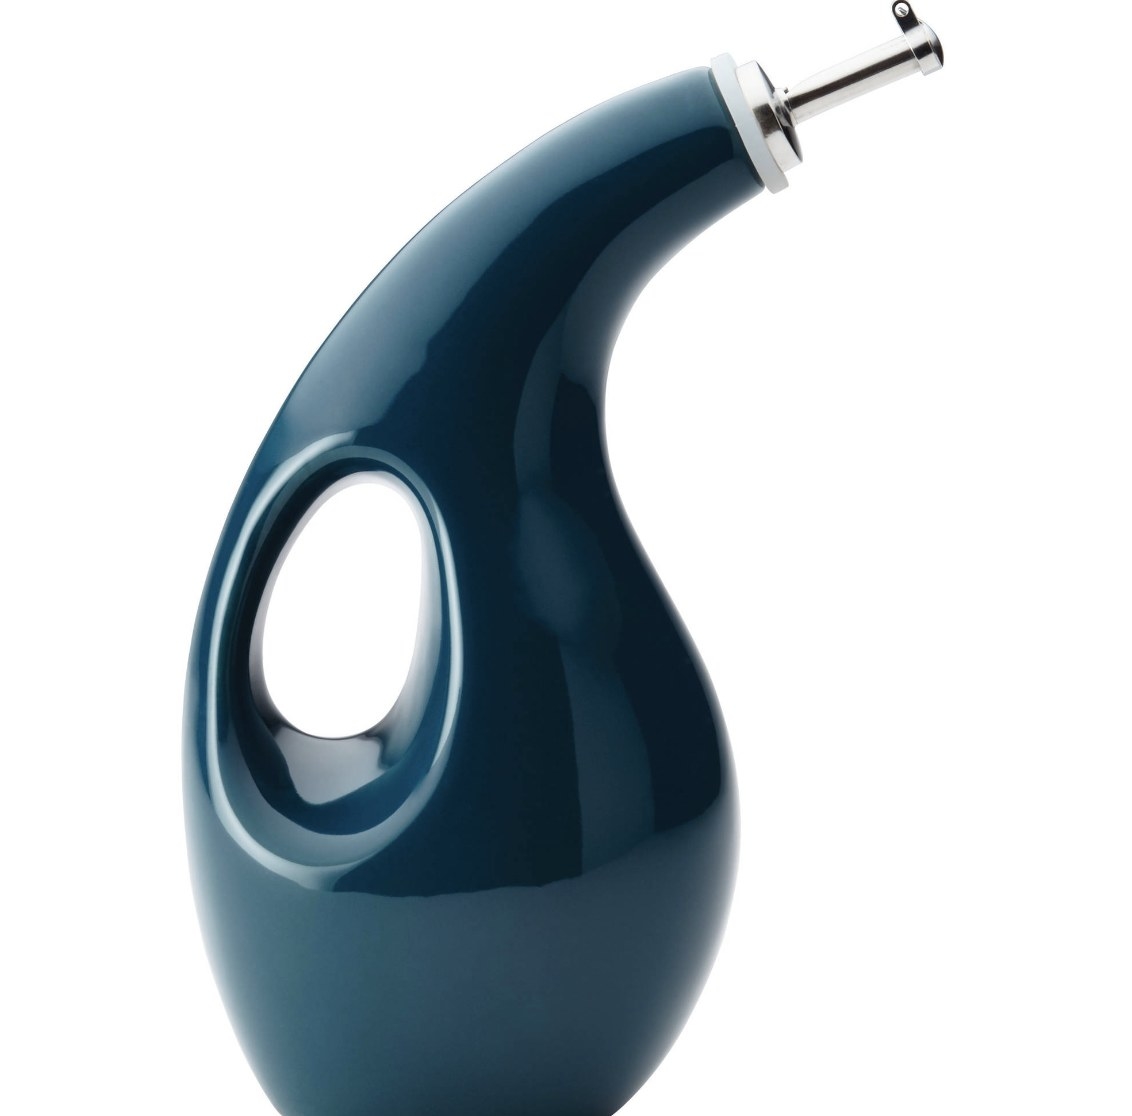 The bottle is marine blue with a large round base, a hollow hole for grip in the middle and a curved thin spout 